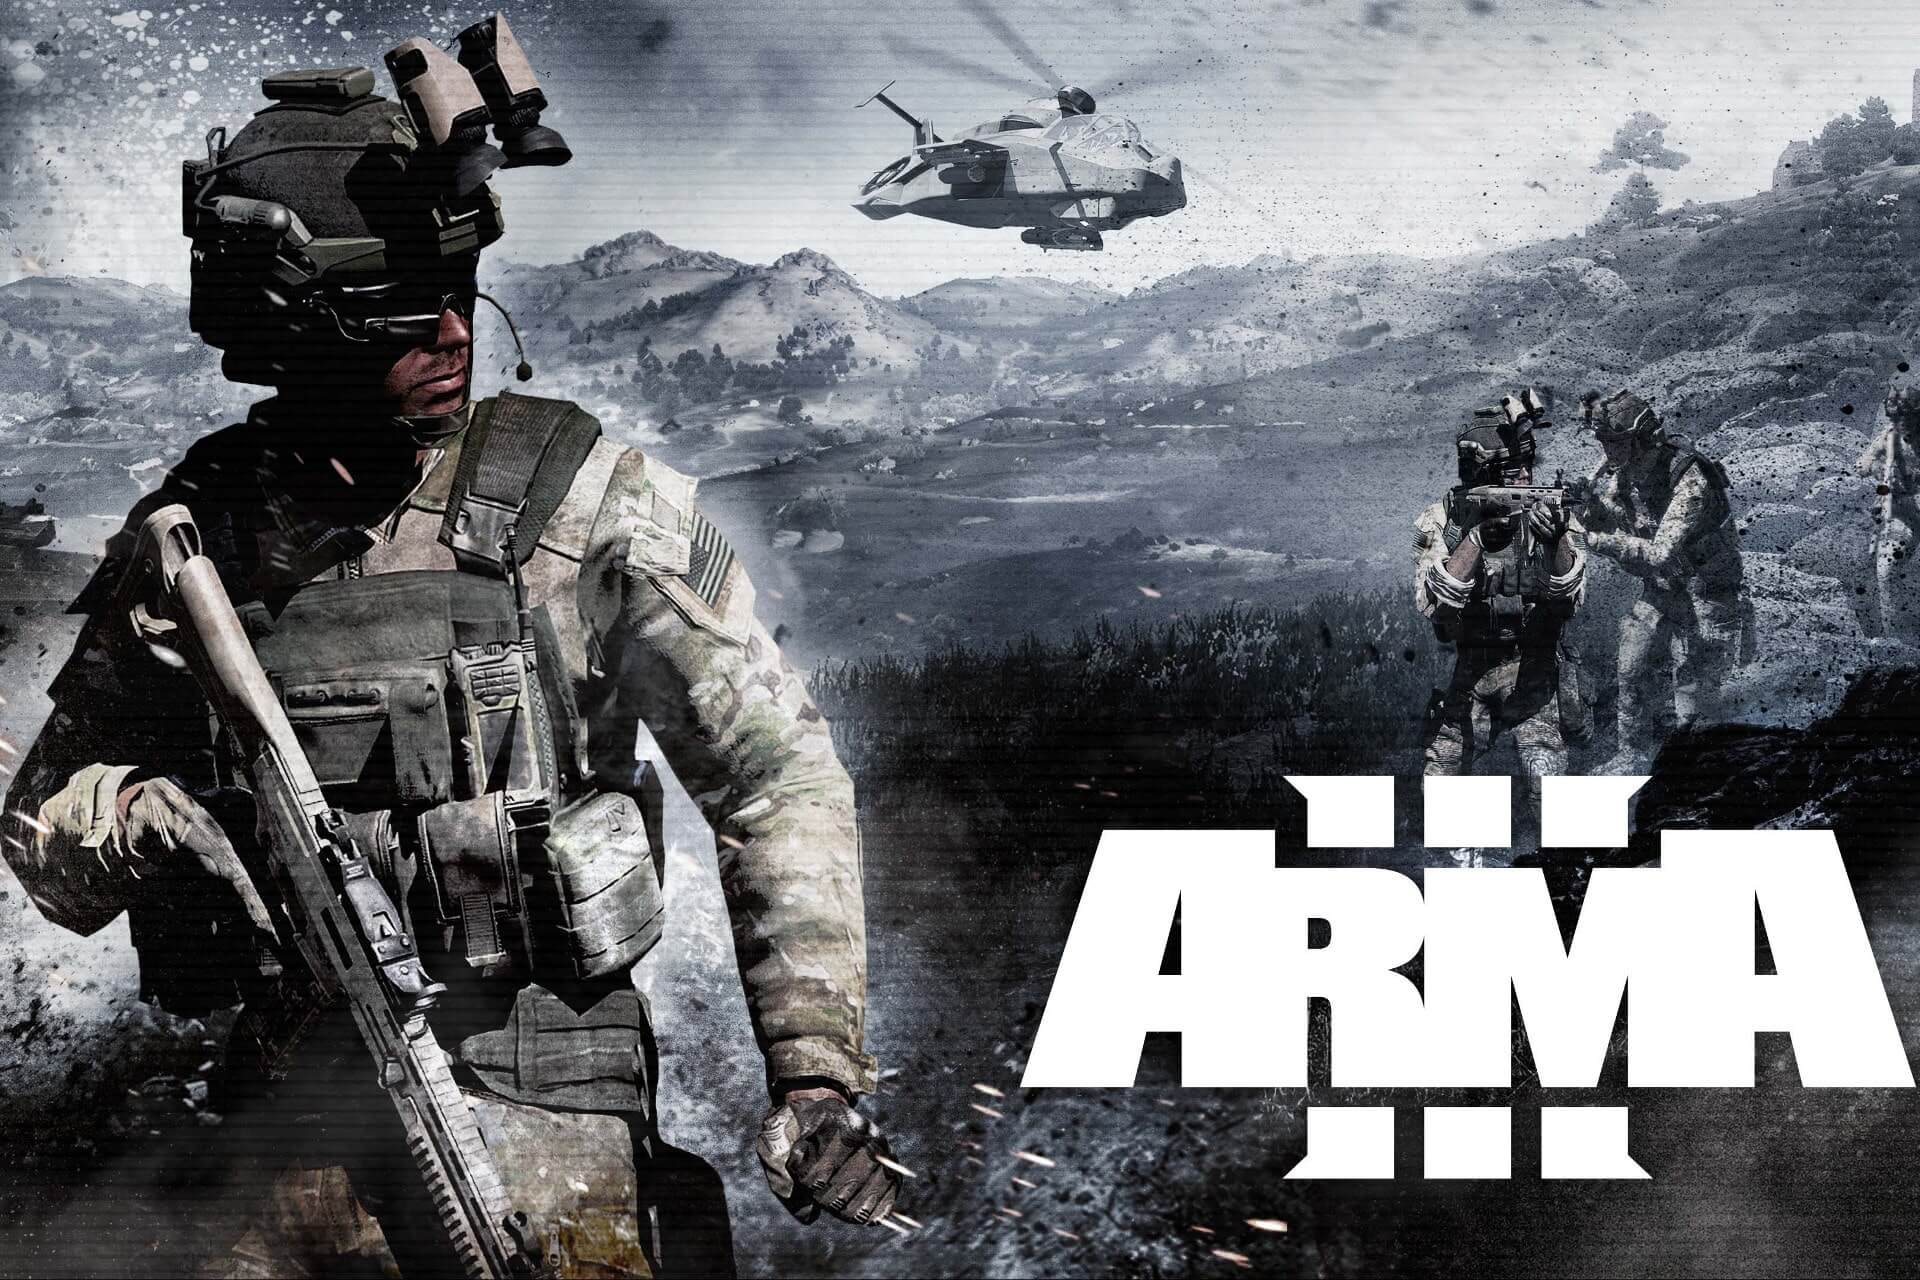 Ray ventilation Modsigelse Arma 3 Ping Issues: 3 Best VPNs to Fix High Ping and Lag